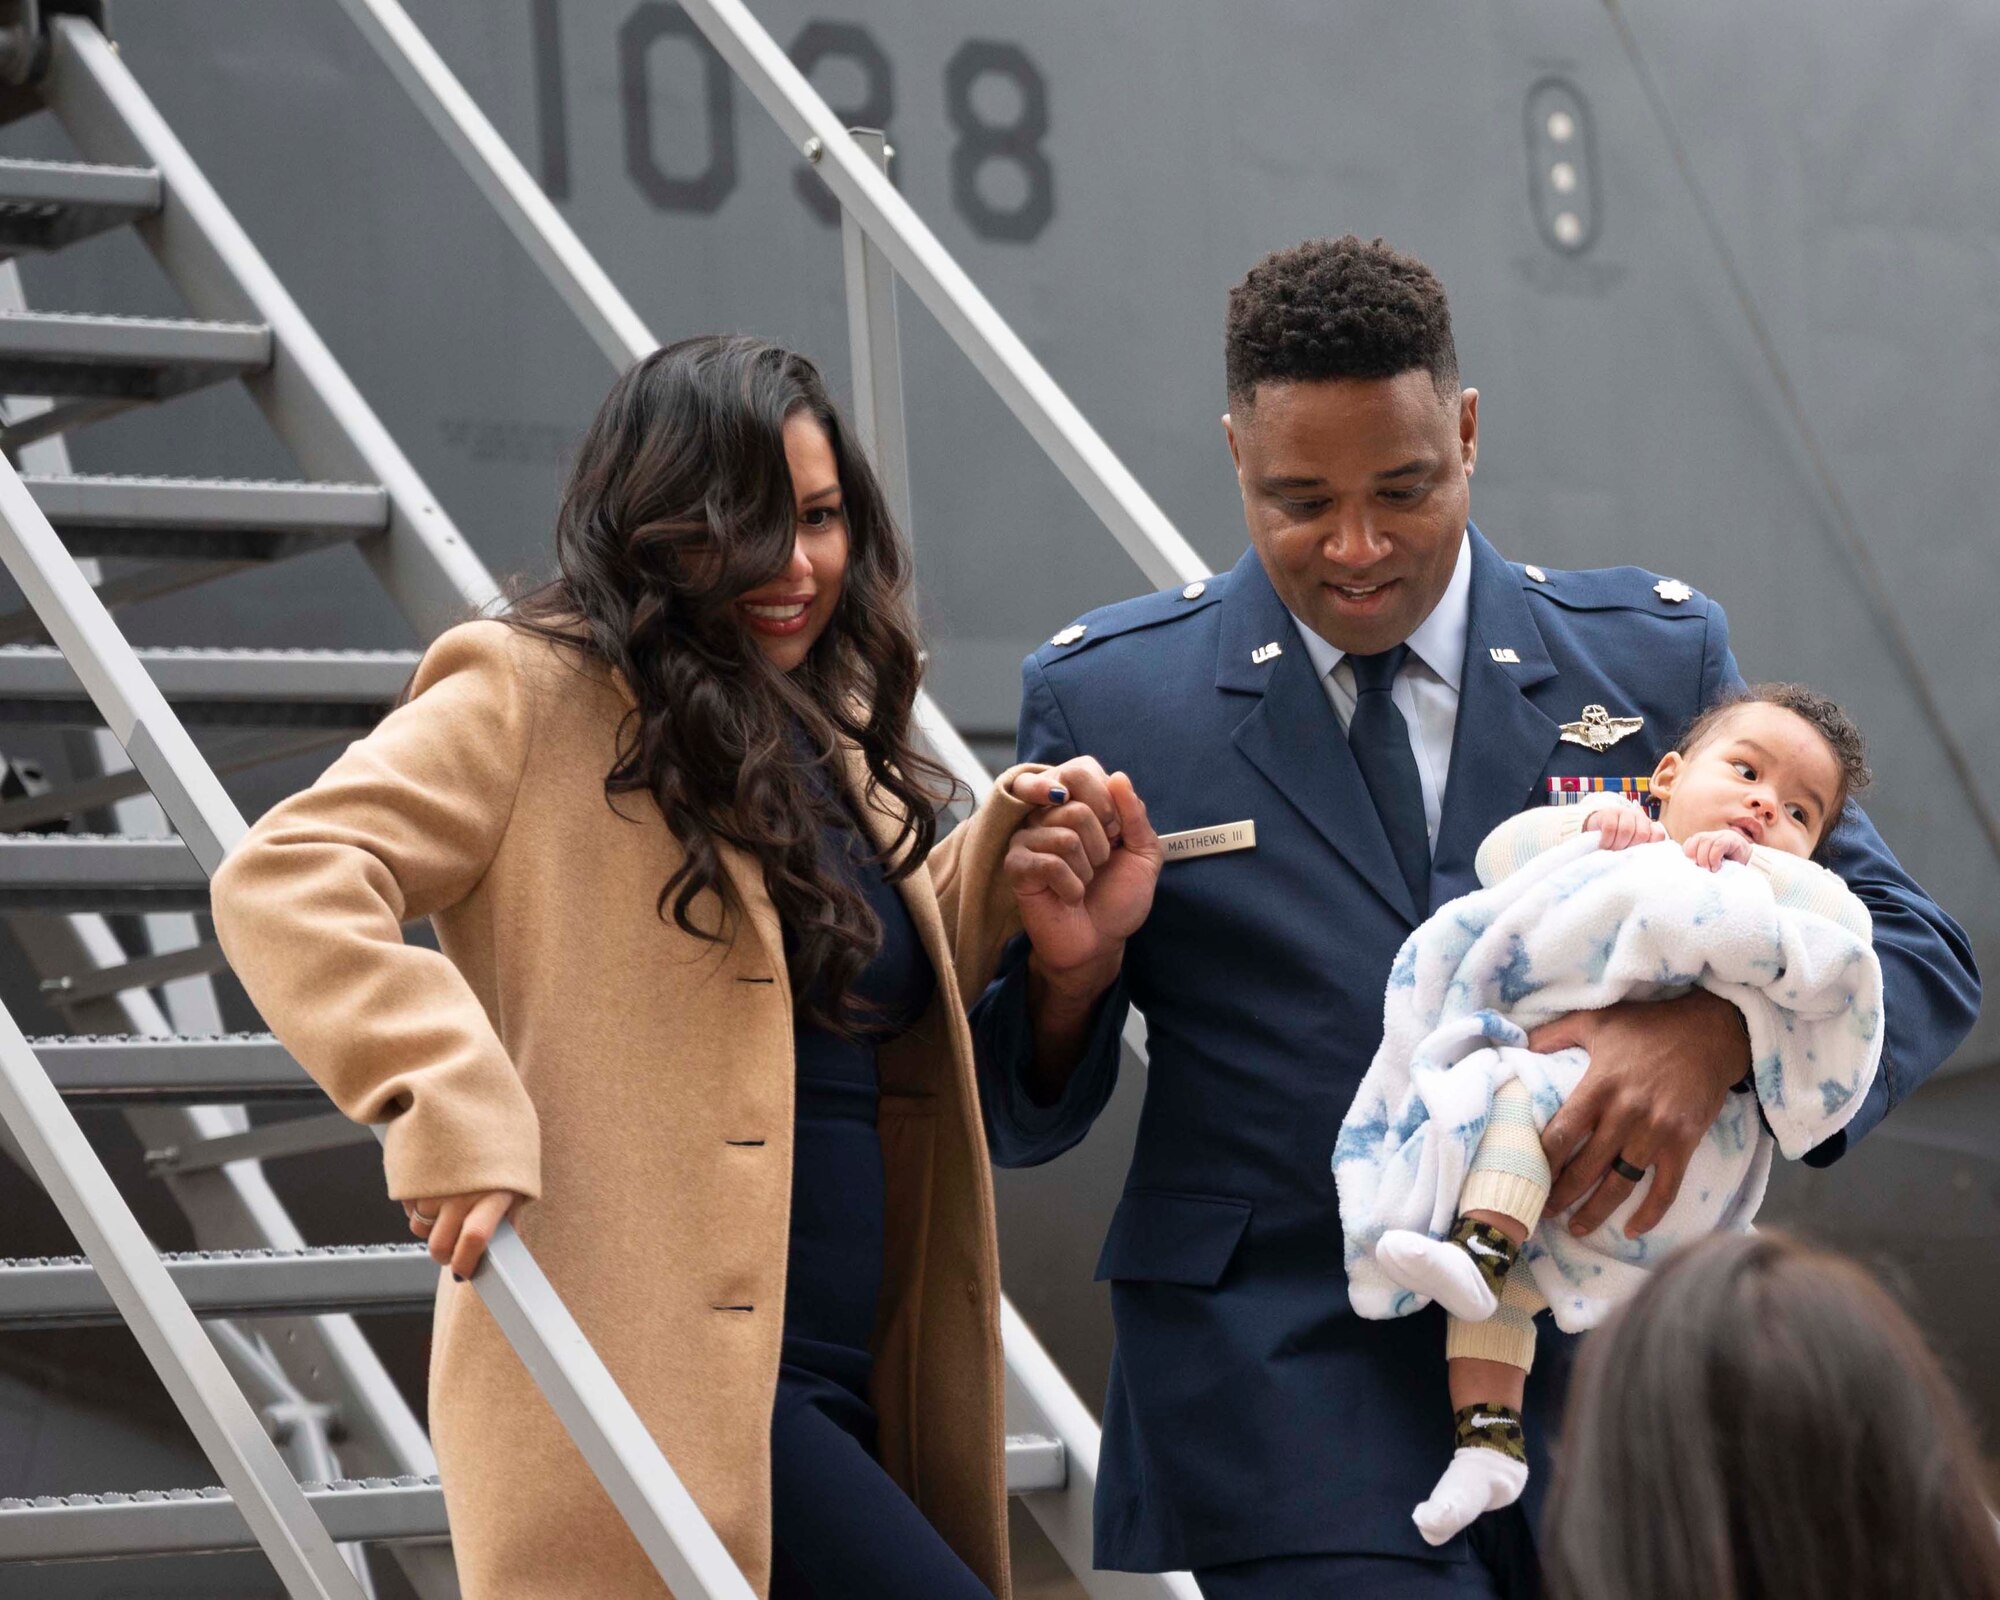 Photo of Airman with family